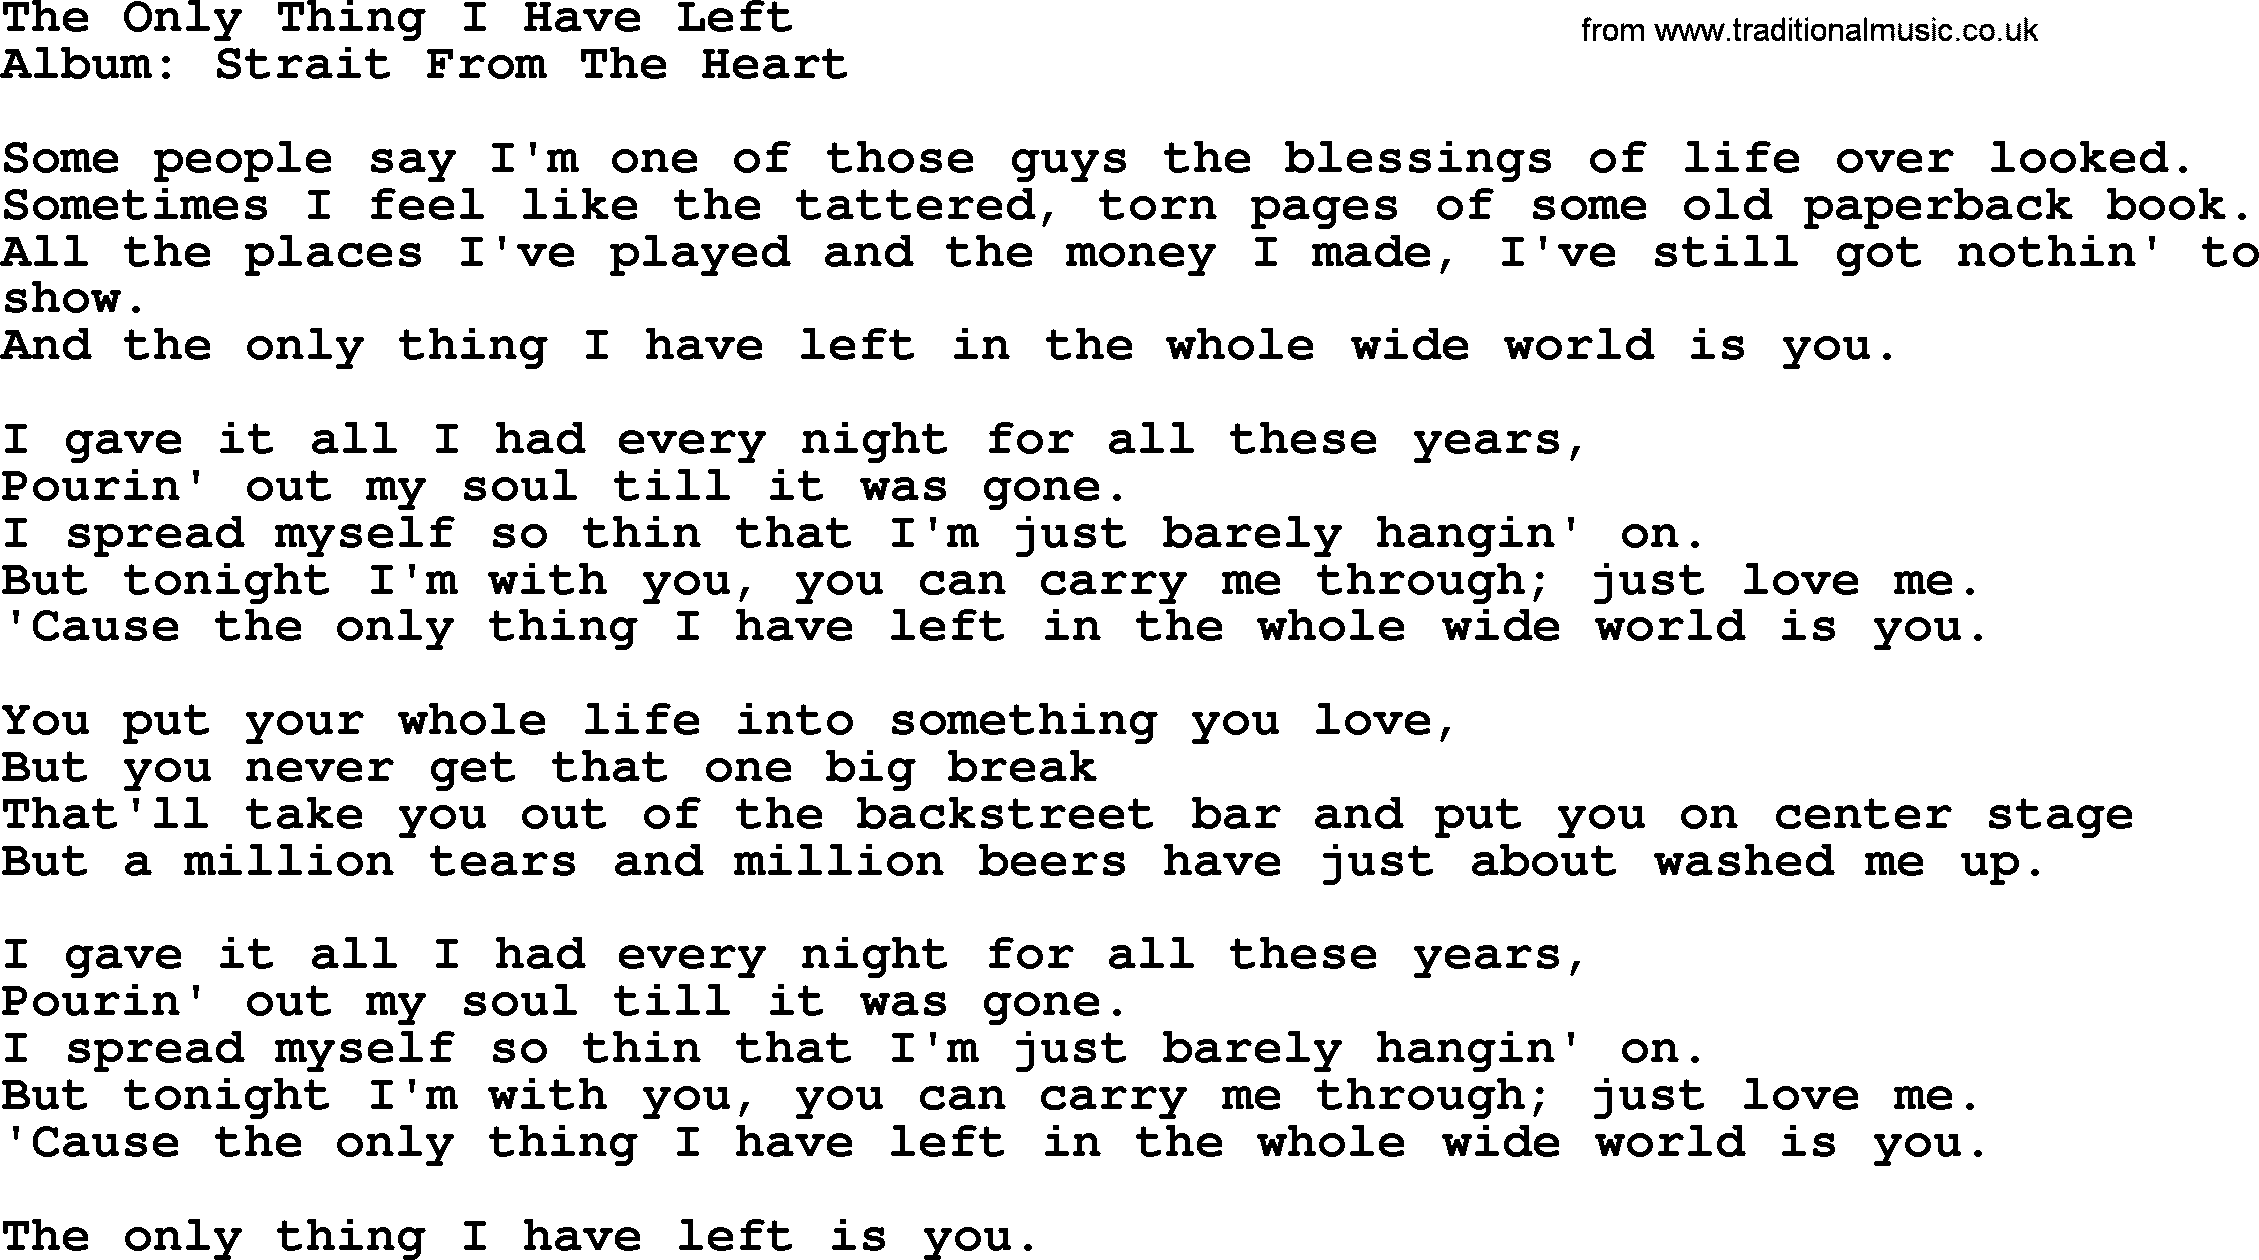 George Strait song: The Only Thing I Have Left, lyrics